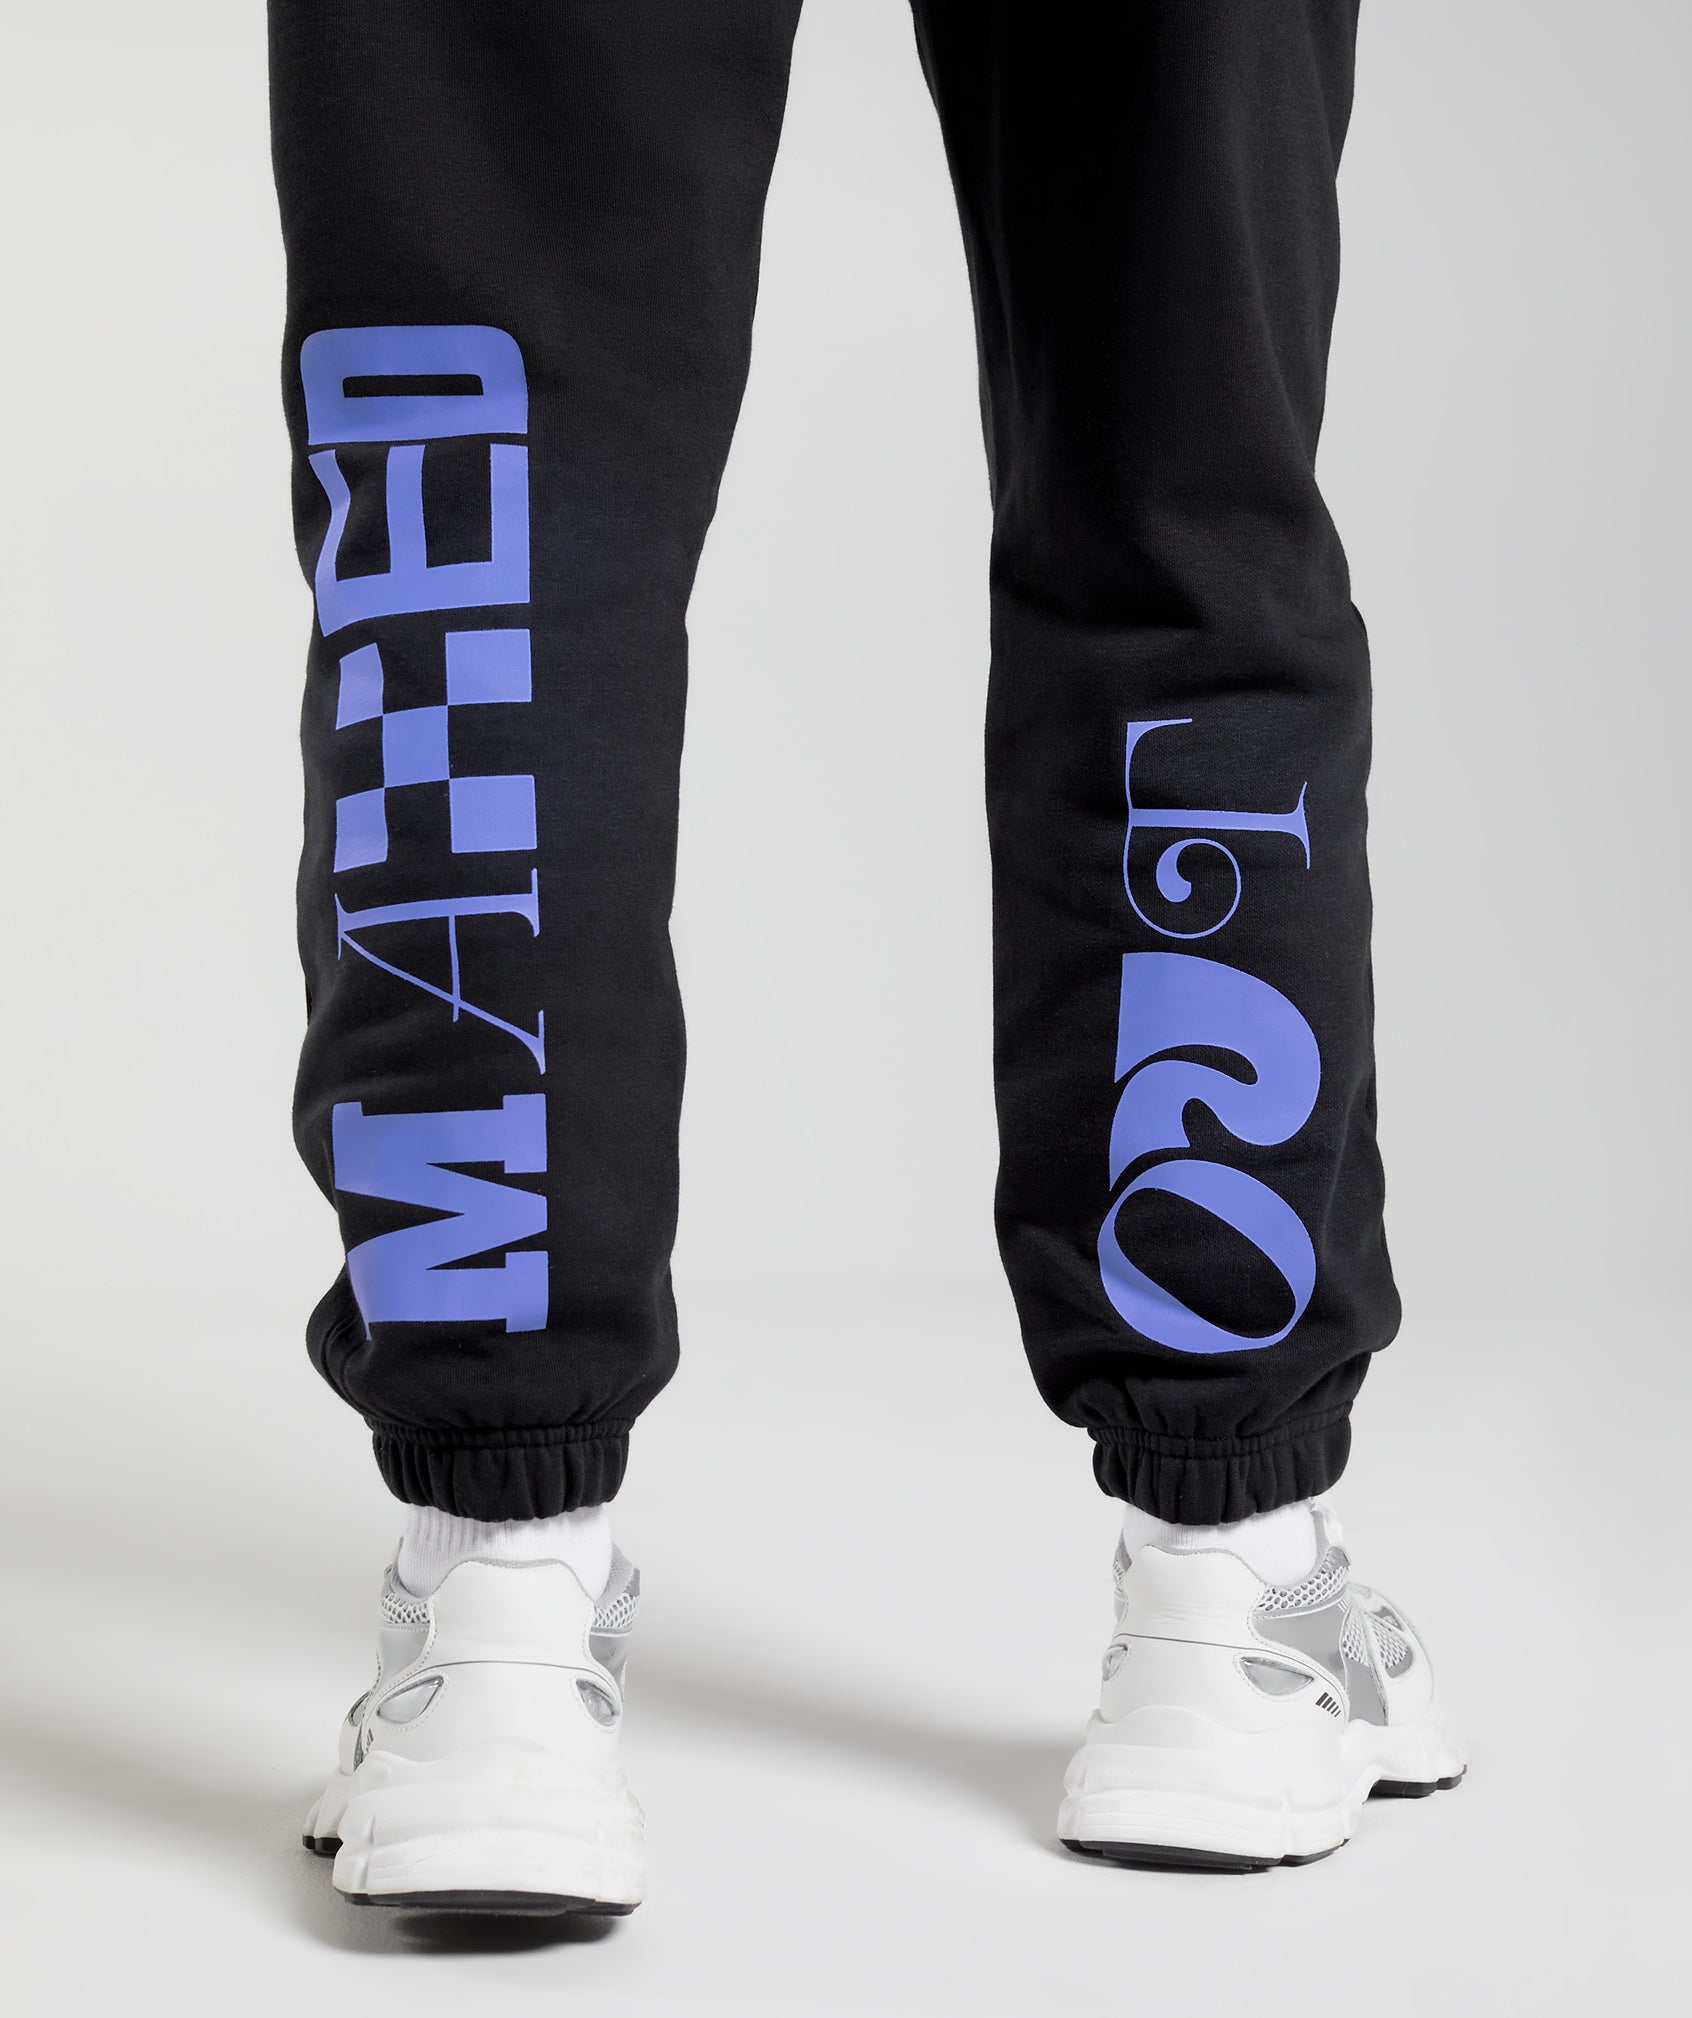 Maxed Out Joggers in Black - view 6